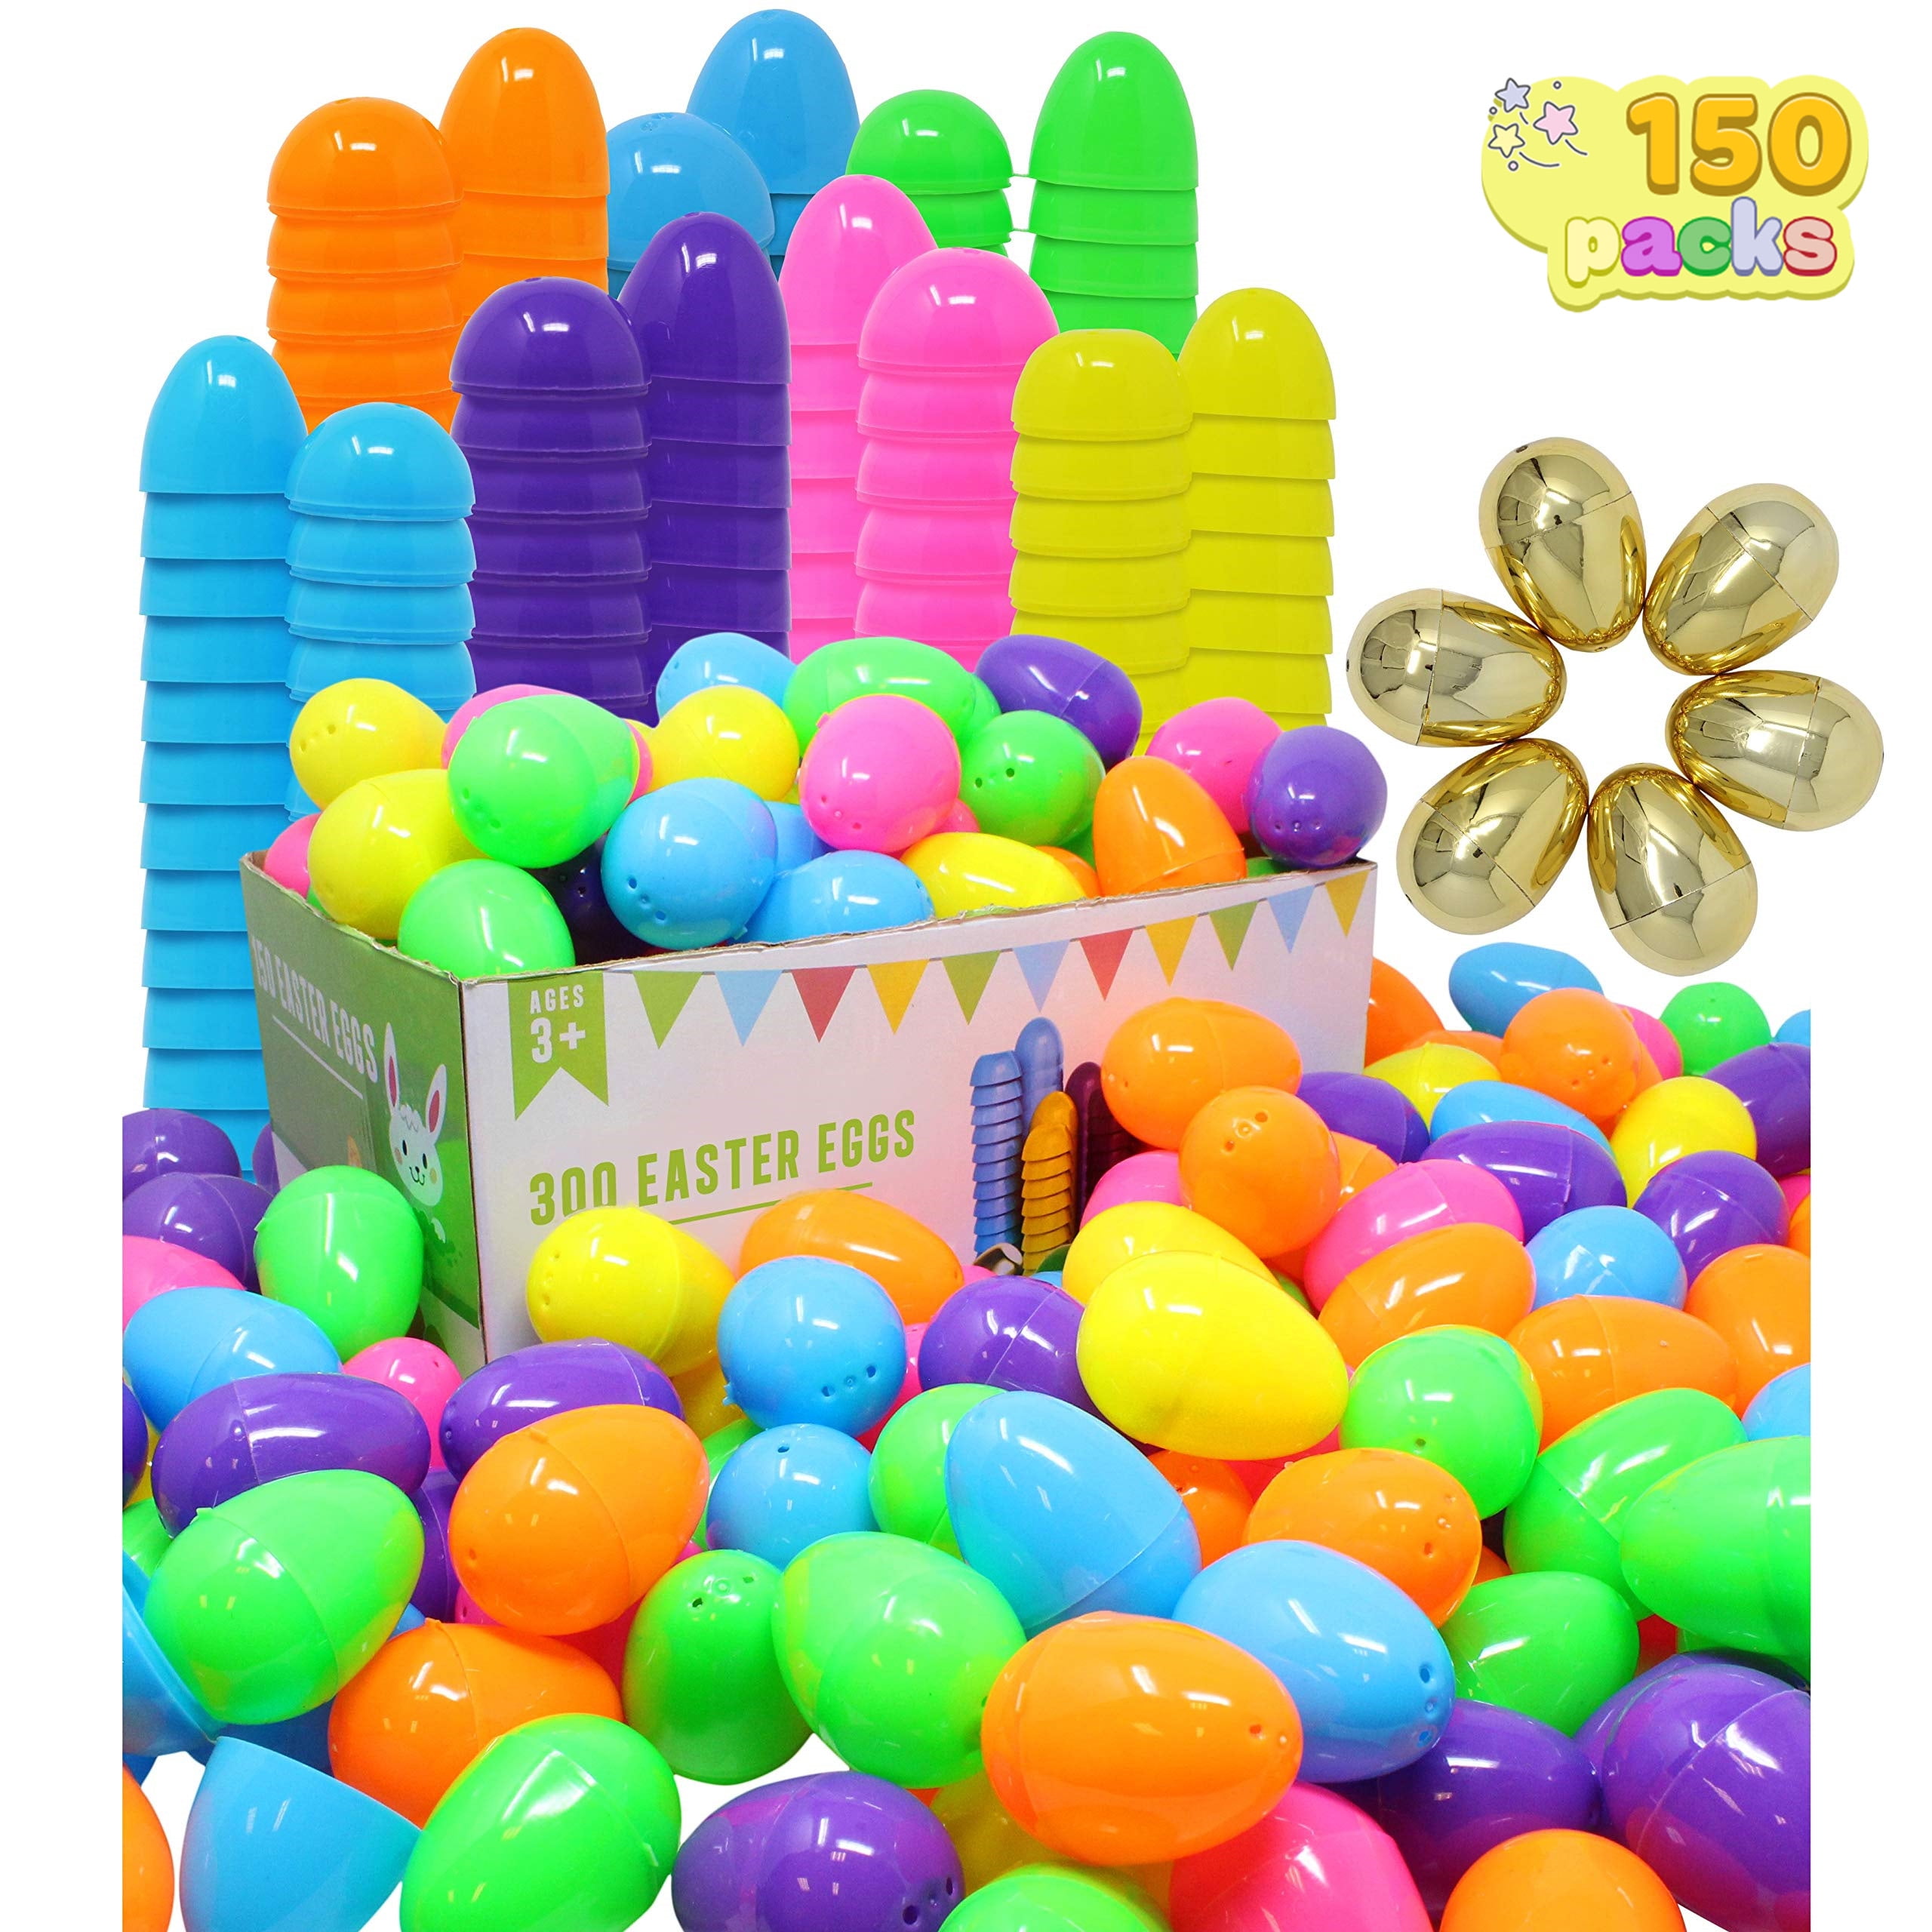 124 Pcs Easter Egg Fillers for Kids Gifts for Boys Toys Age 4-8 Small Gifts for Kids Toys Valentine Easter Party Favors Easter Basket Stuffers